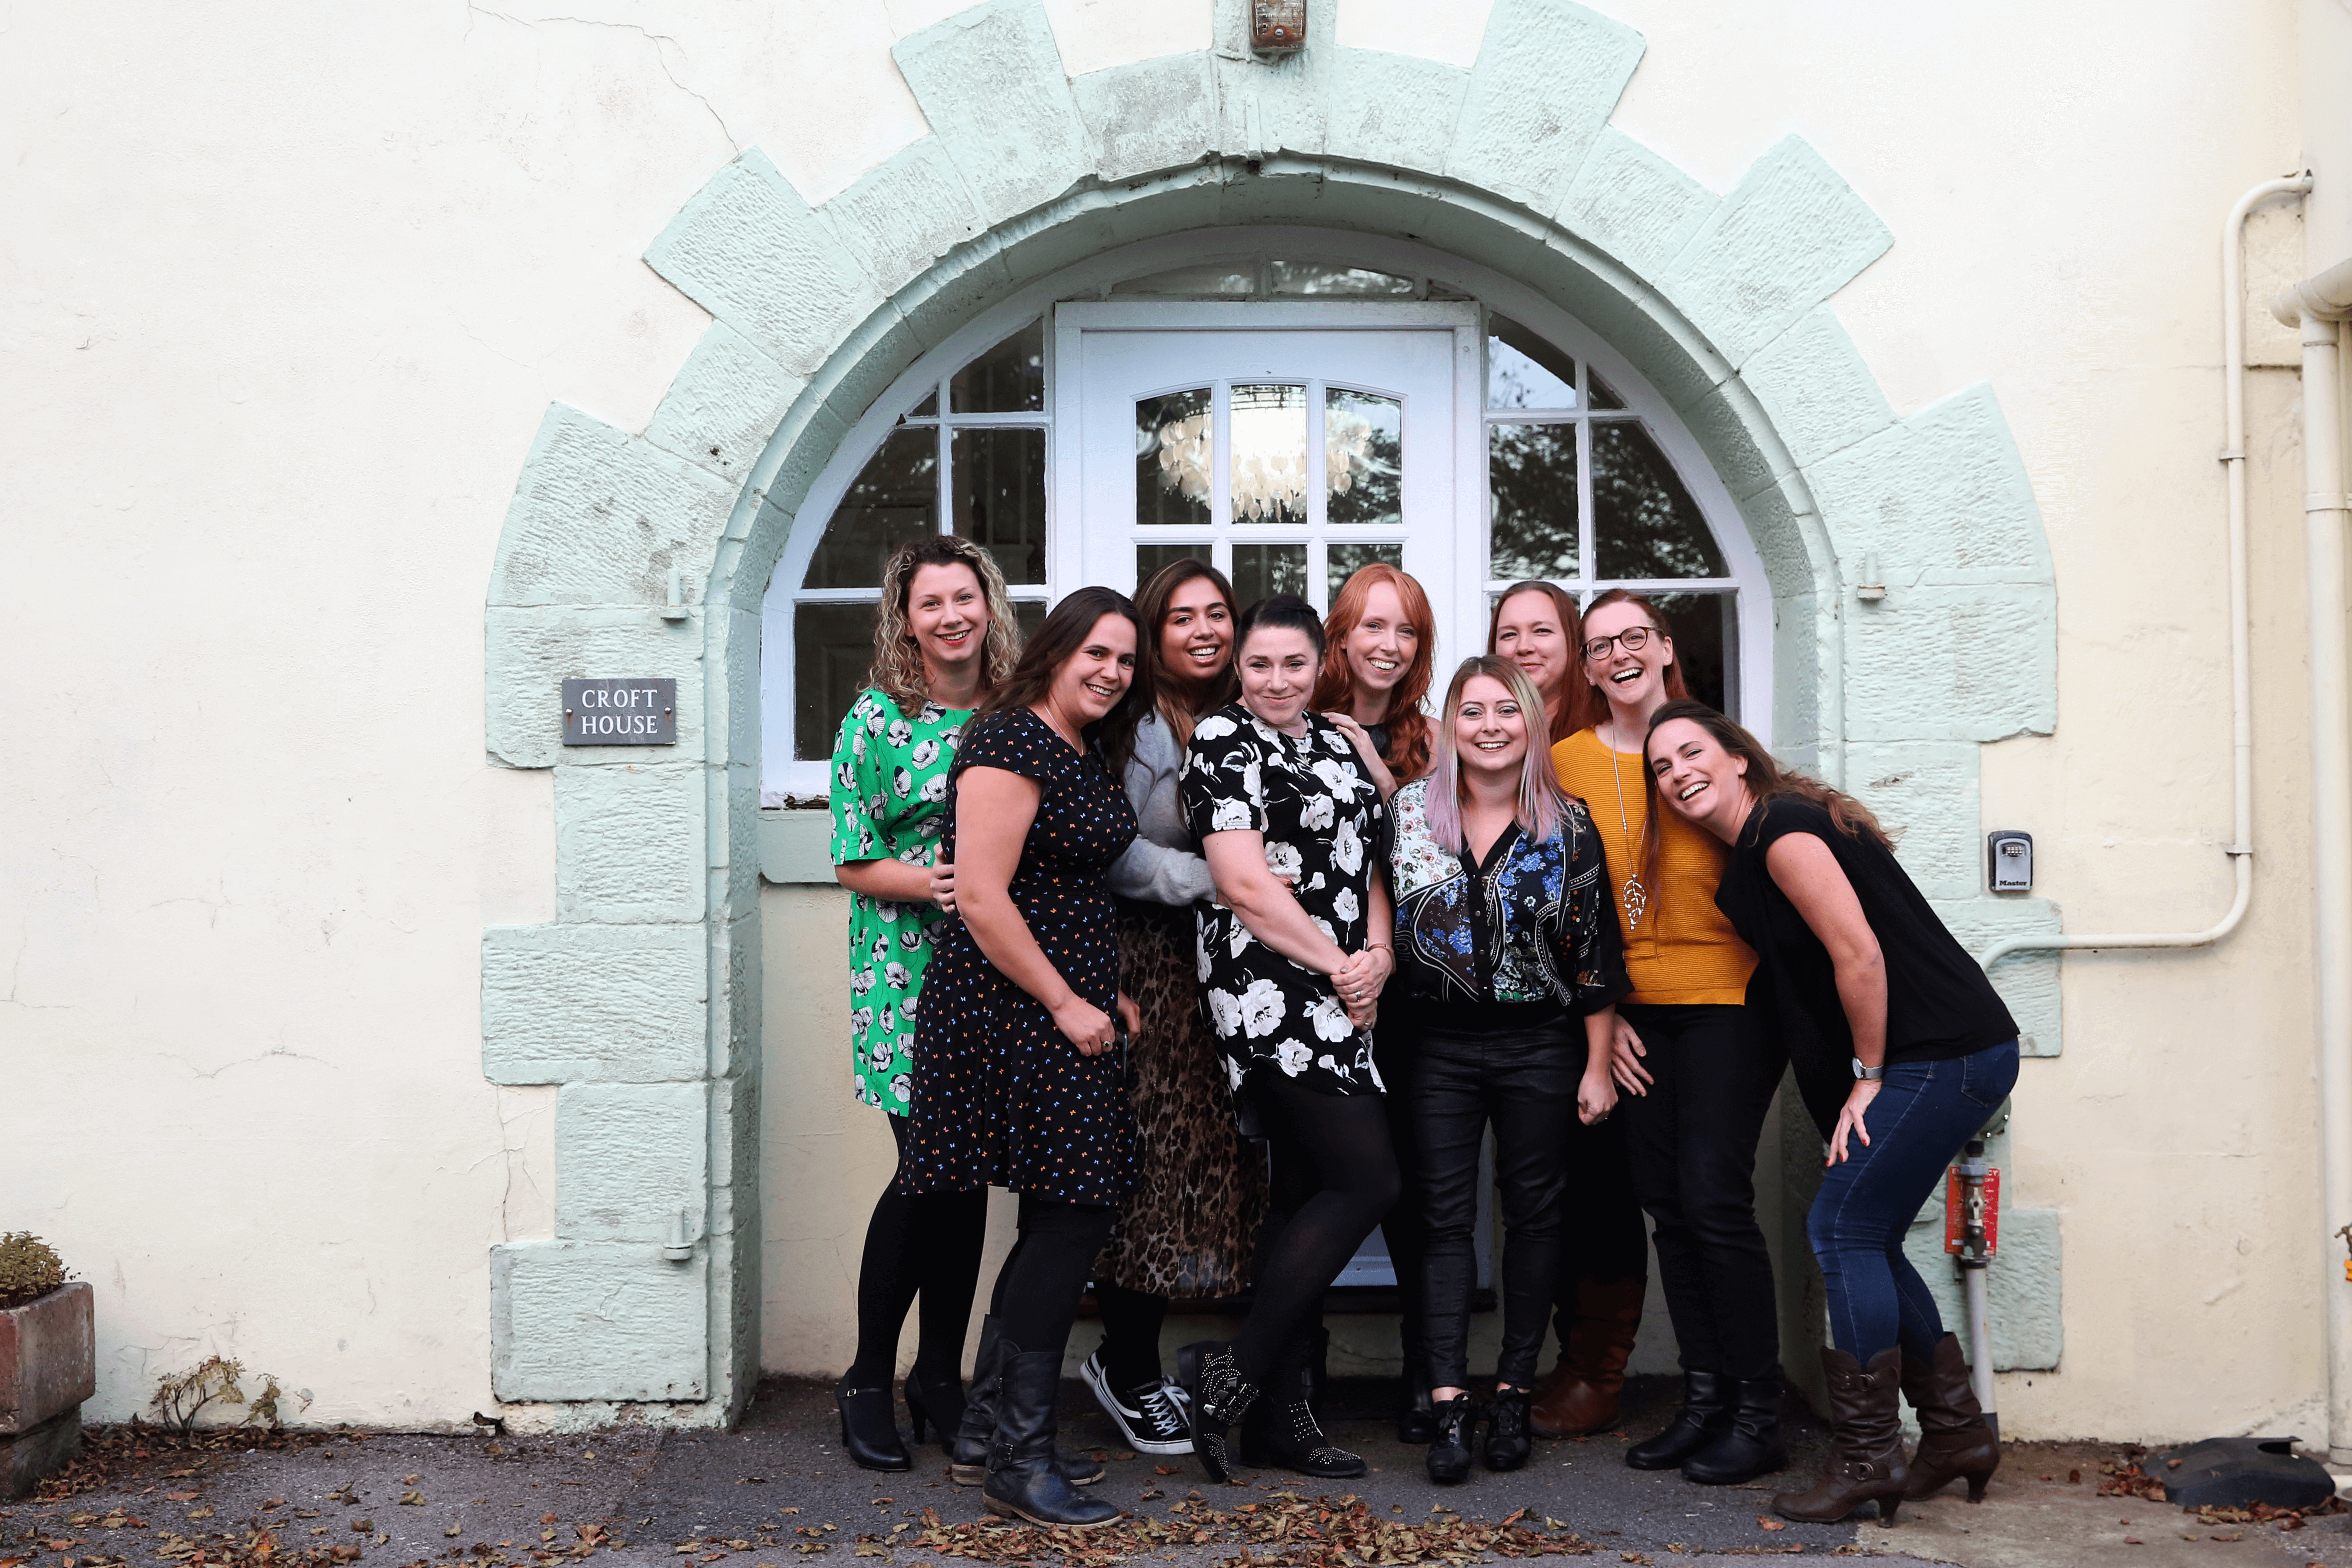 Bloggers ready for a night out at Croft House